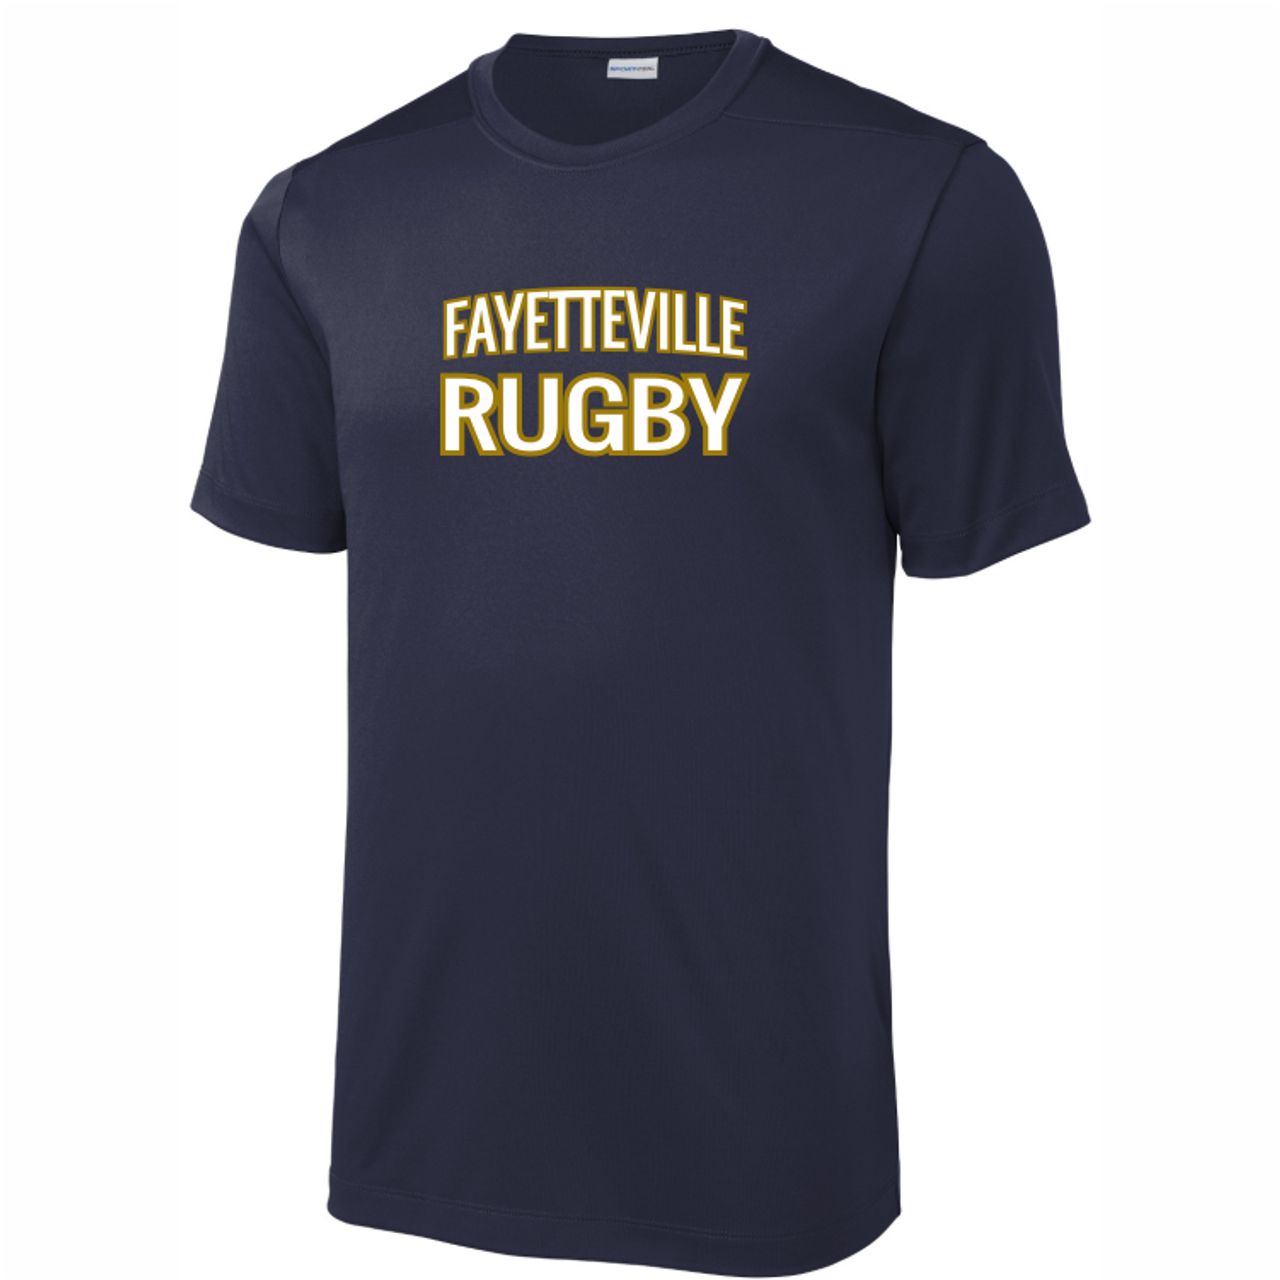 Fayetteville Area Rugby Performance Tee, Navy